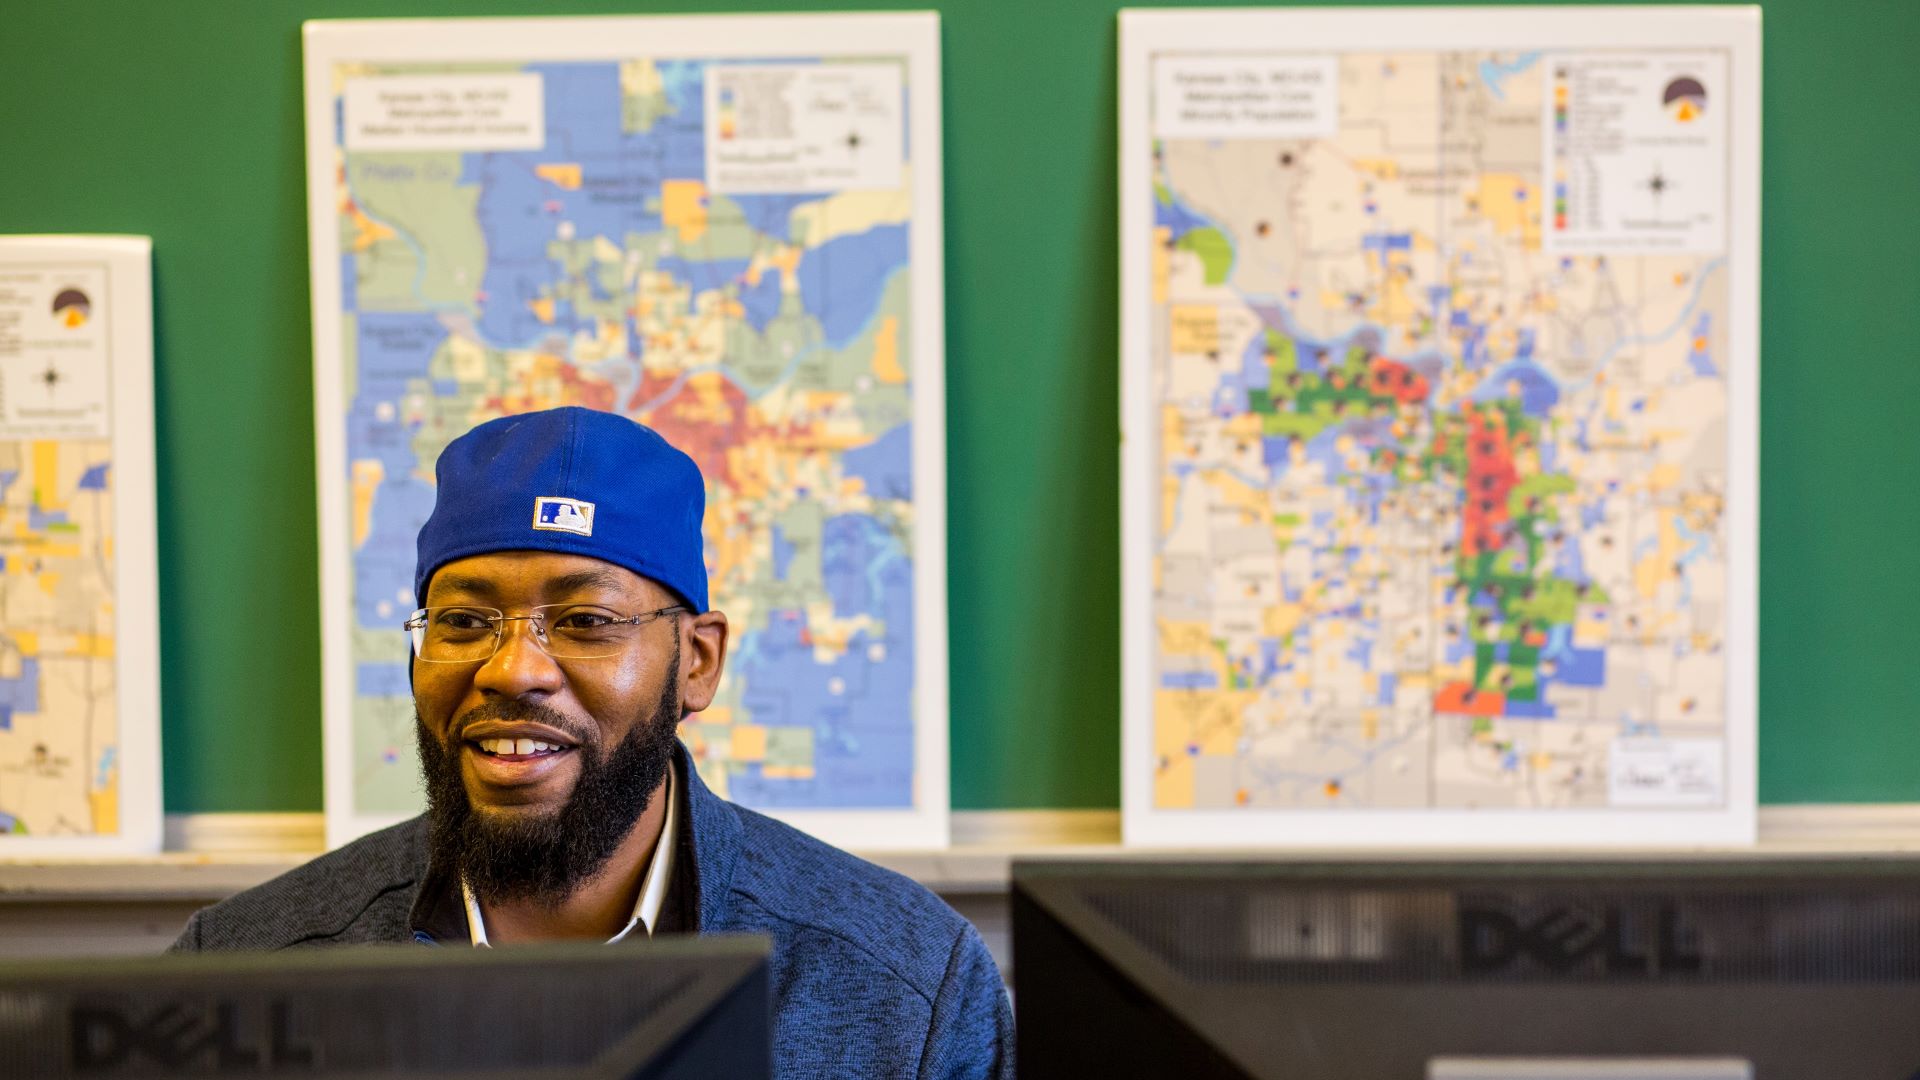 student wearing baseball cap sits at computer in front of maps